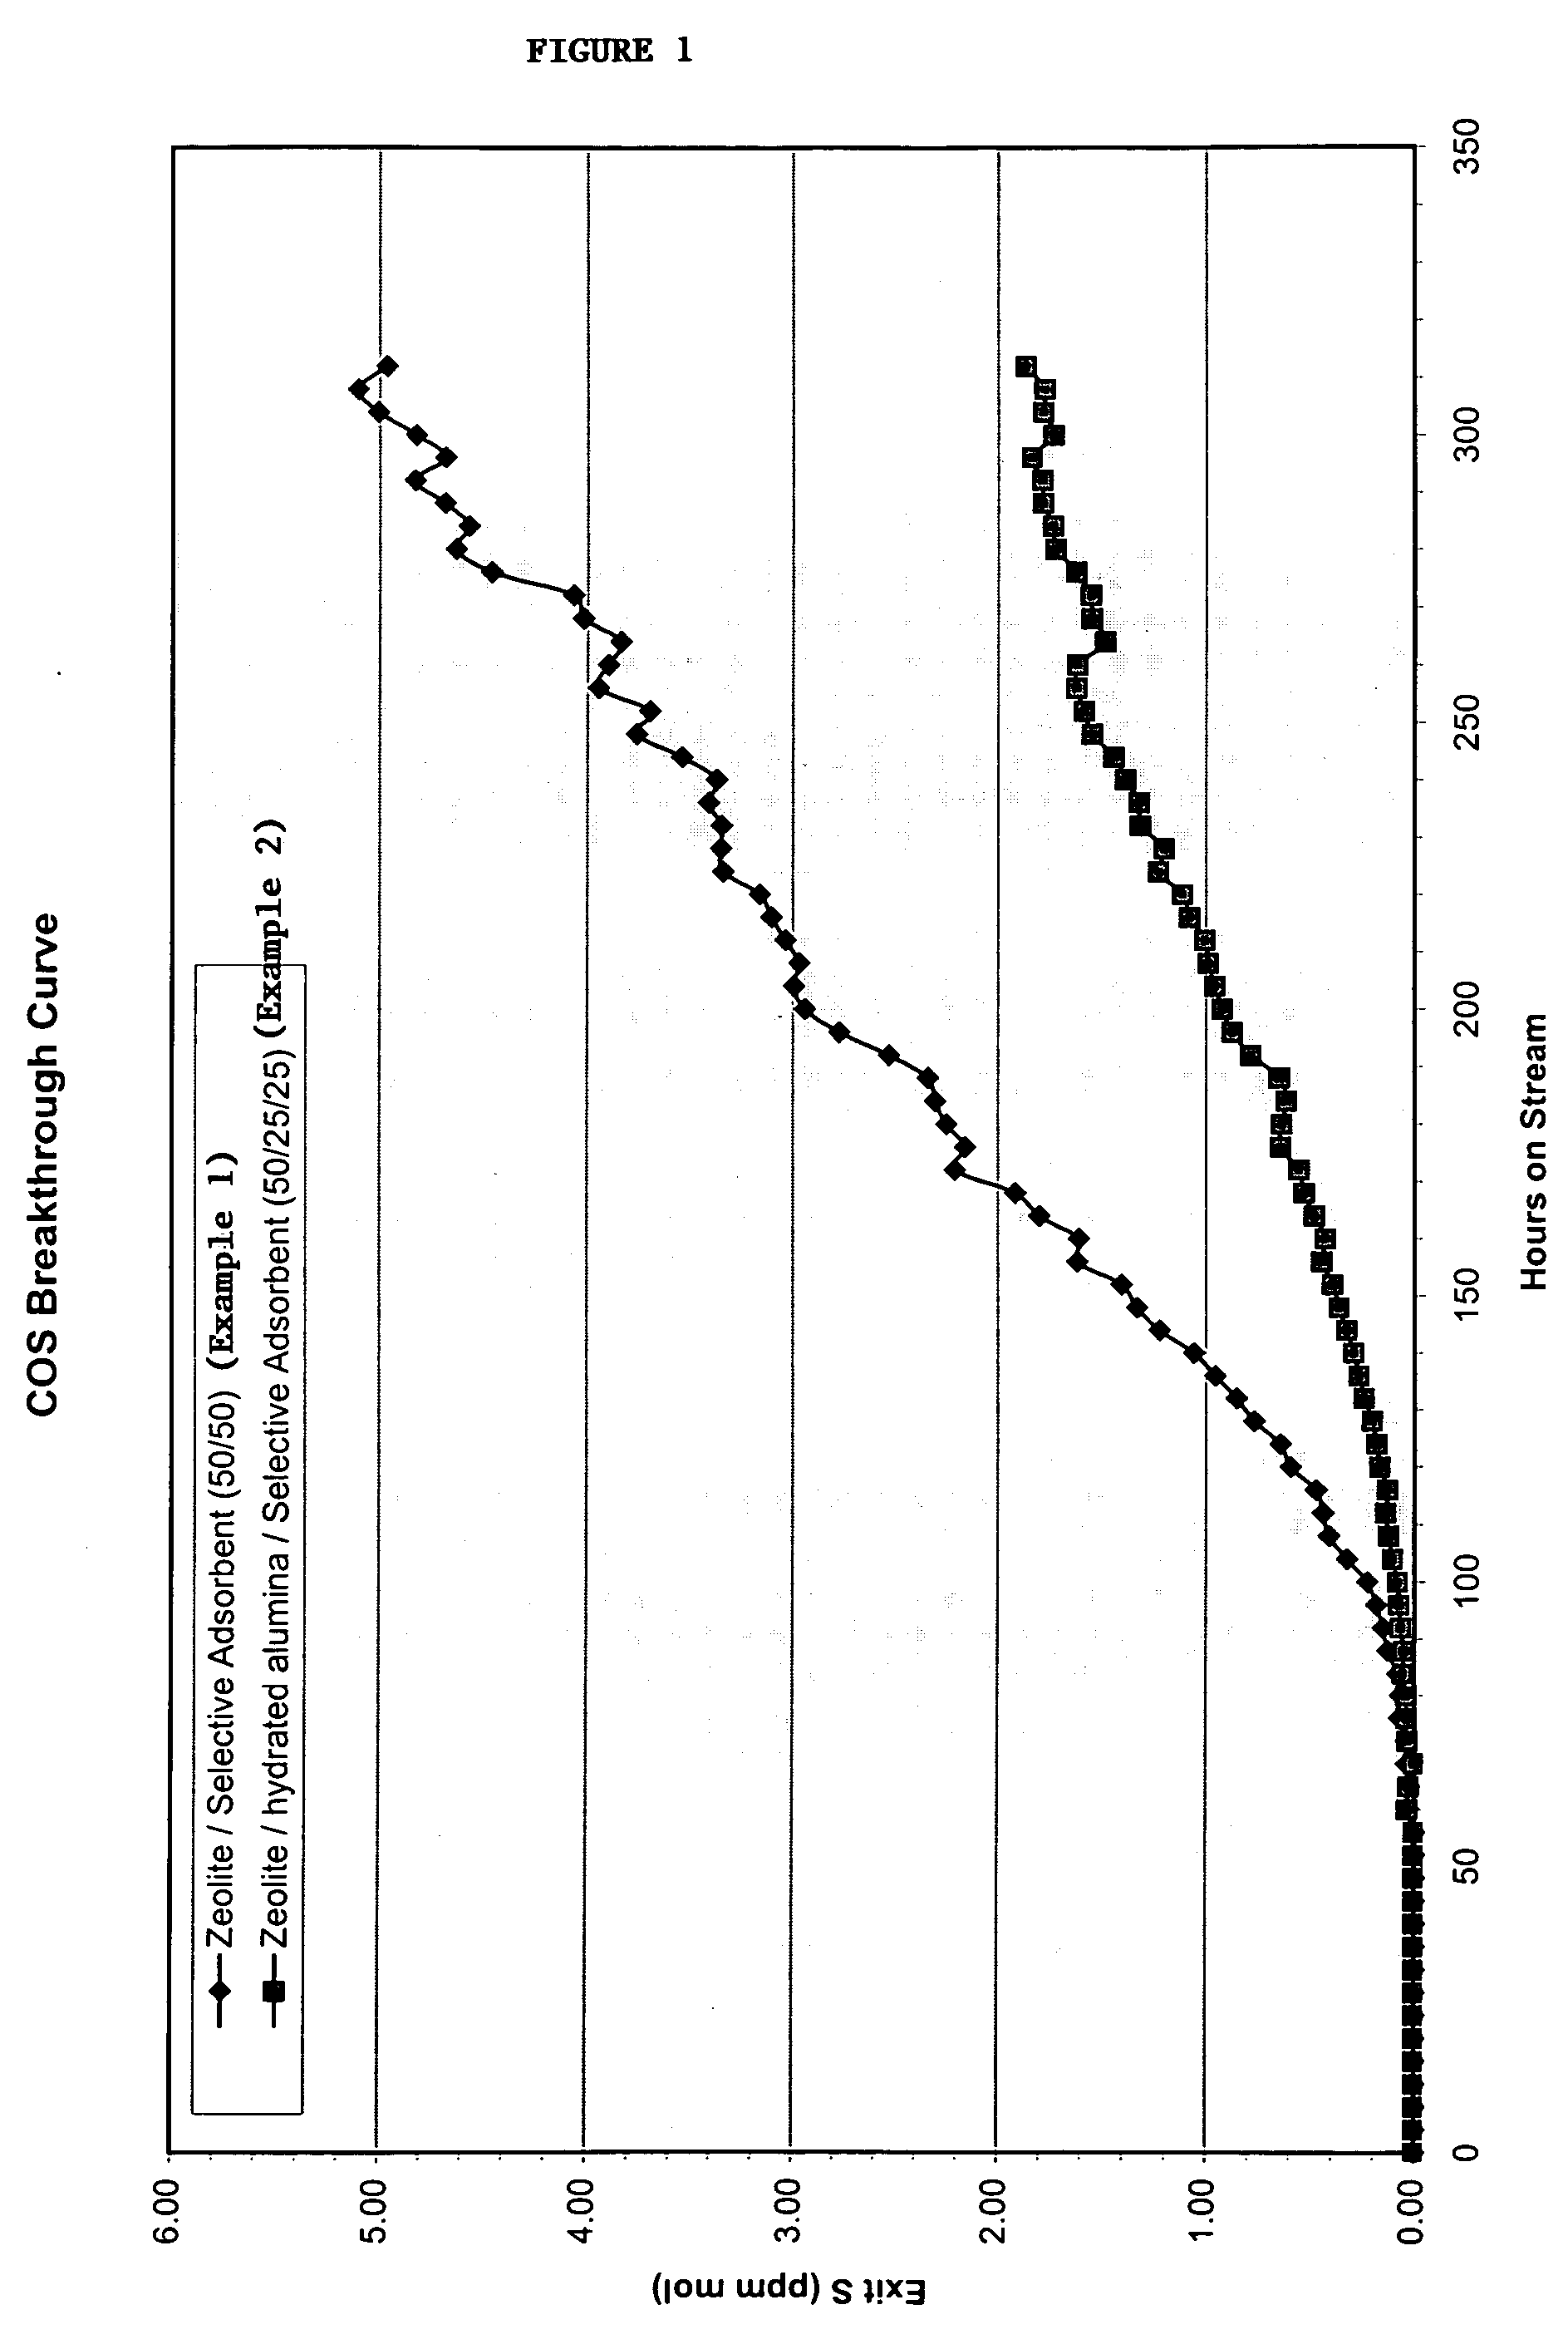 Desulfurization system and method for desulfurizing a fuel stream